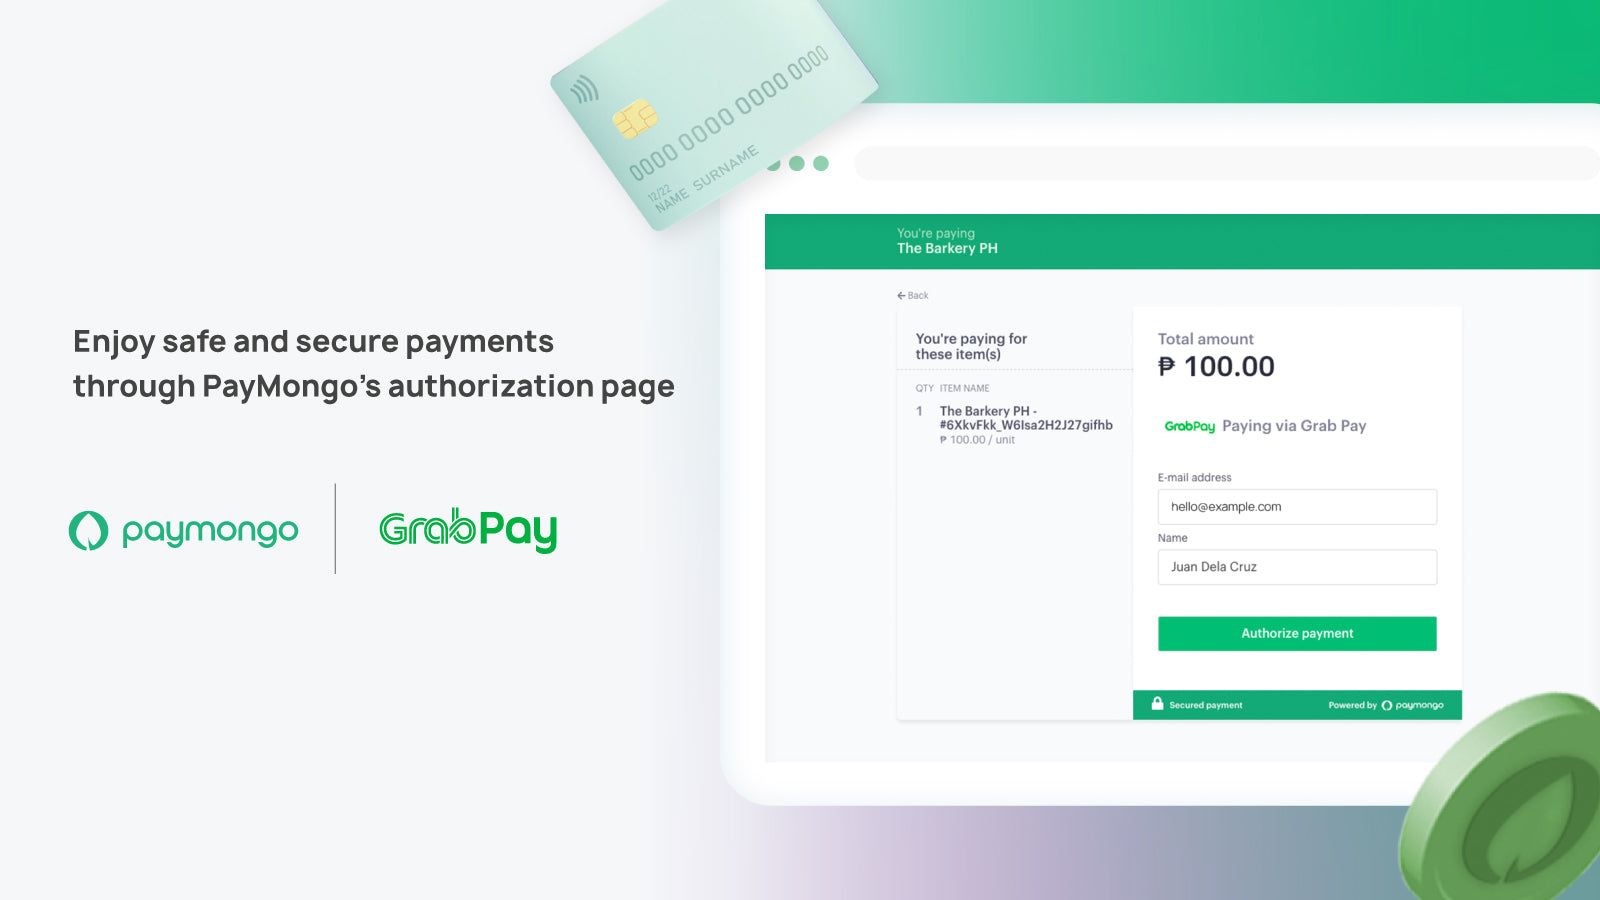 Pay safely and securely through PayMongo’s authorization page.